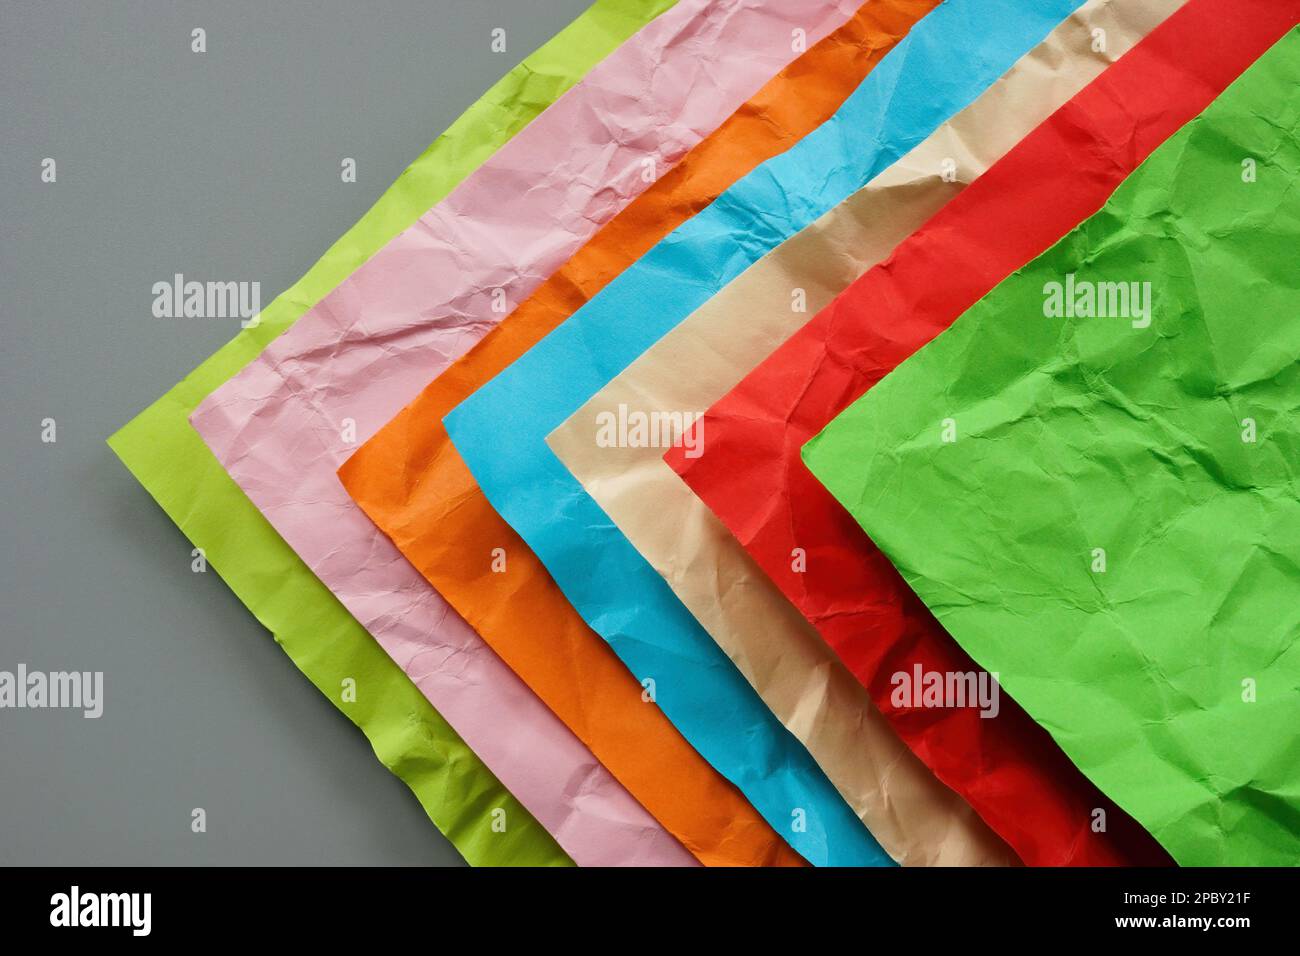 Multi-colored crumpled sheets of paper as a concept of diversity. Stock Photo